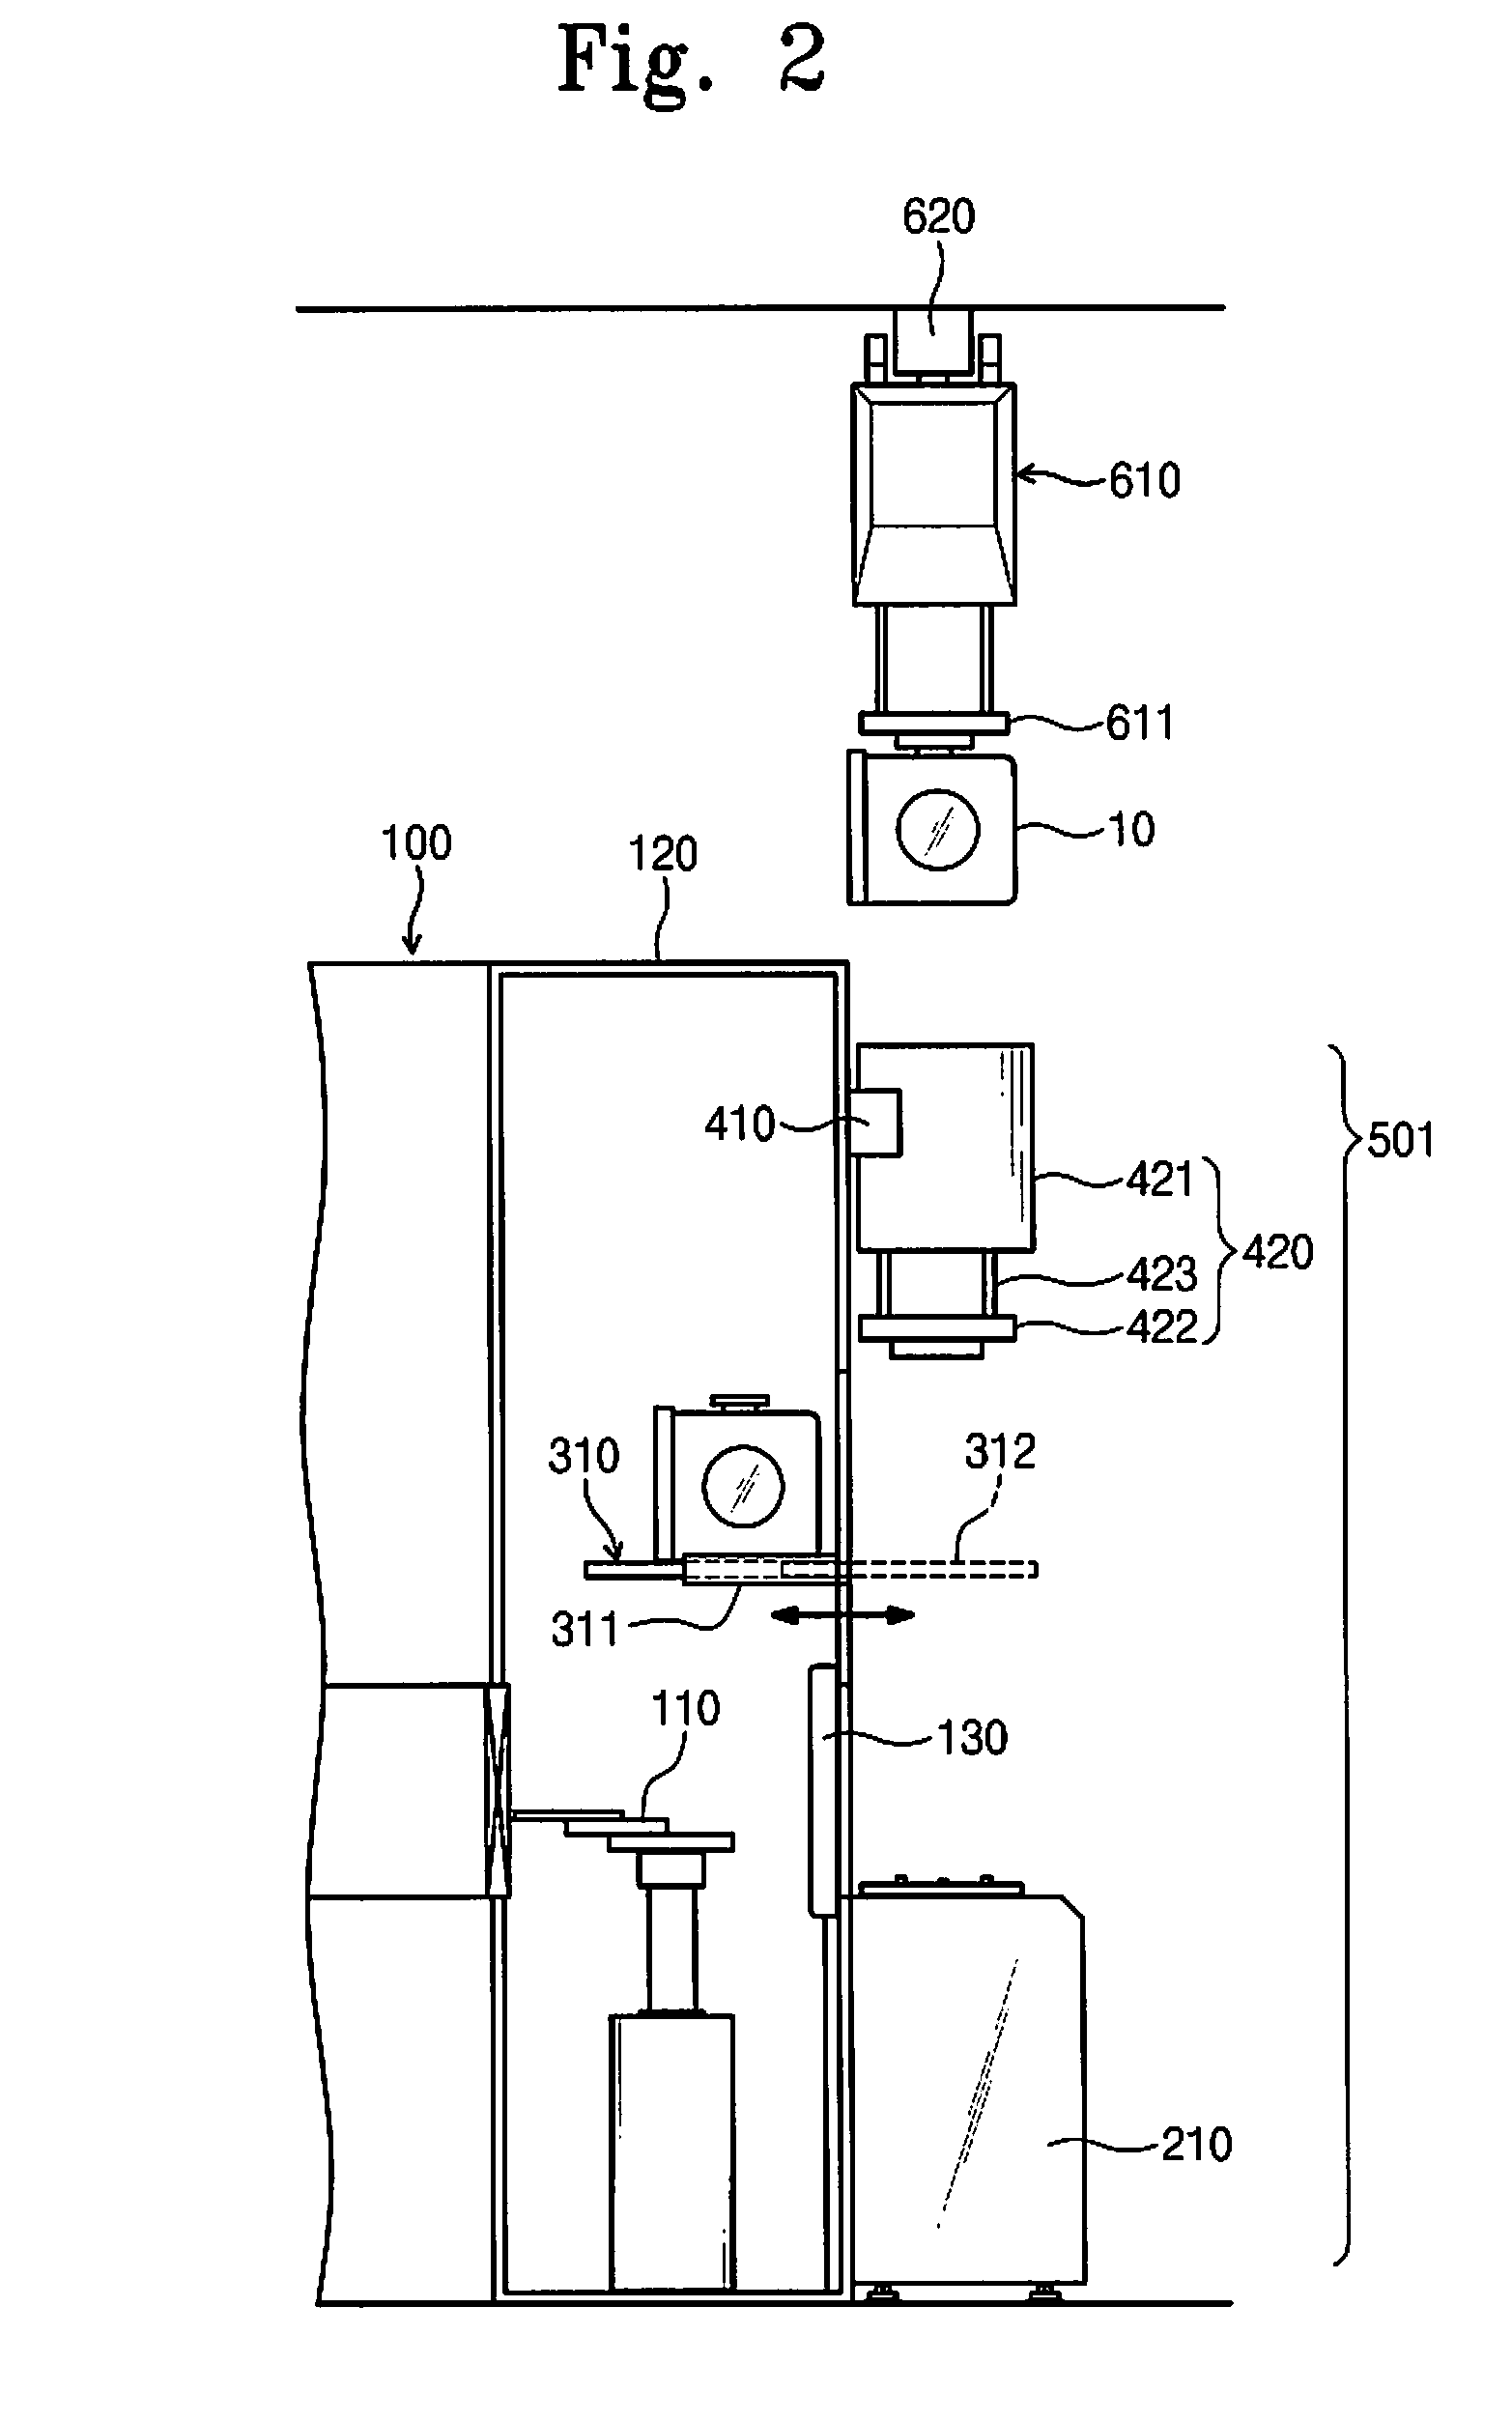 Substrate processing apparatus and method for transferring substrate for the apparatus